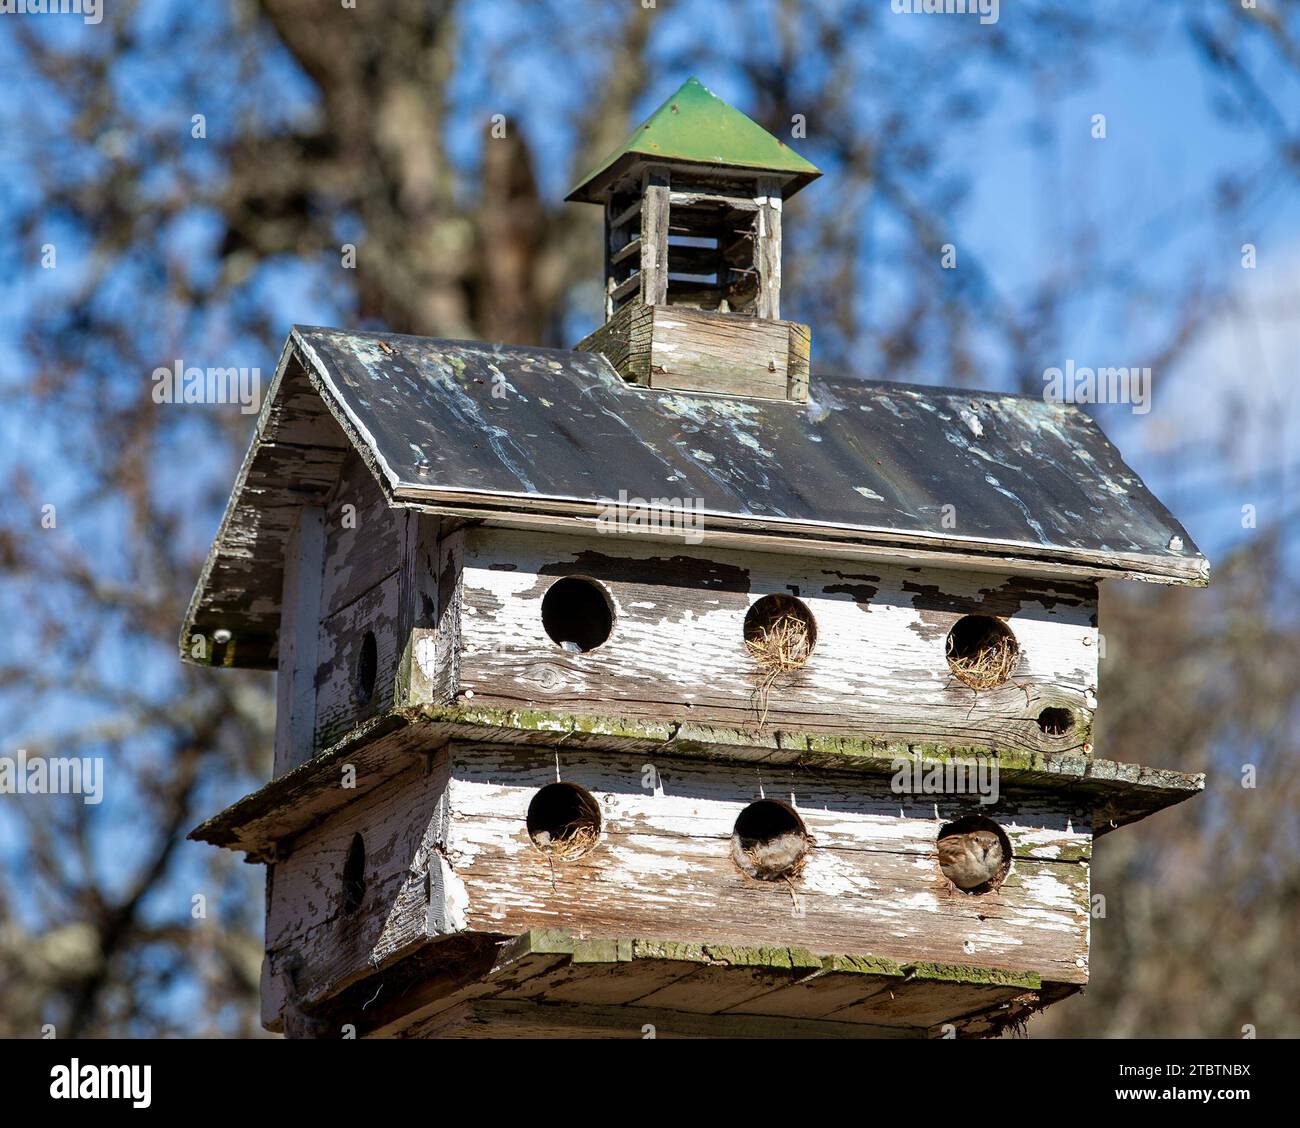 A large birdhouse with many openings for birds Stock Photo